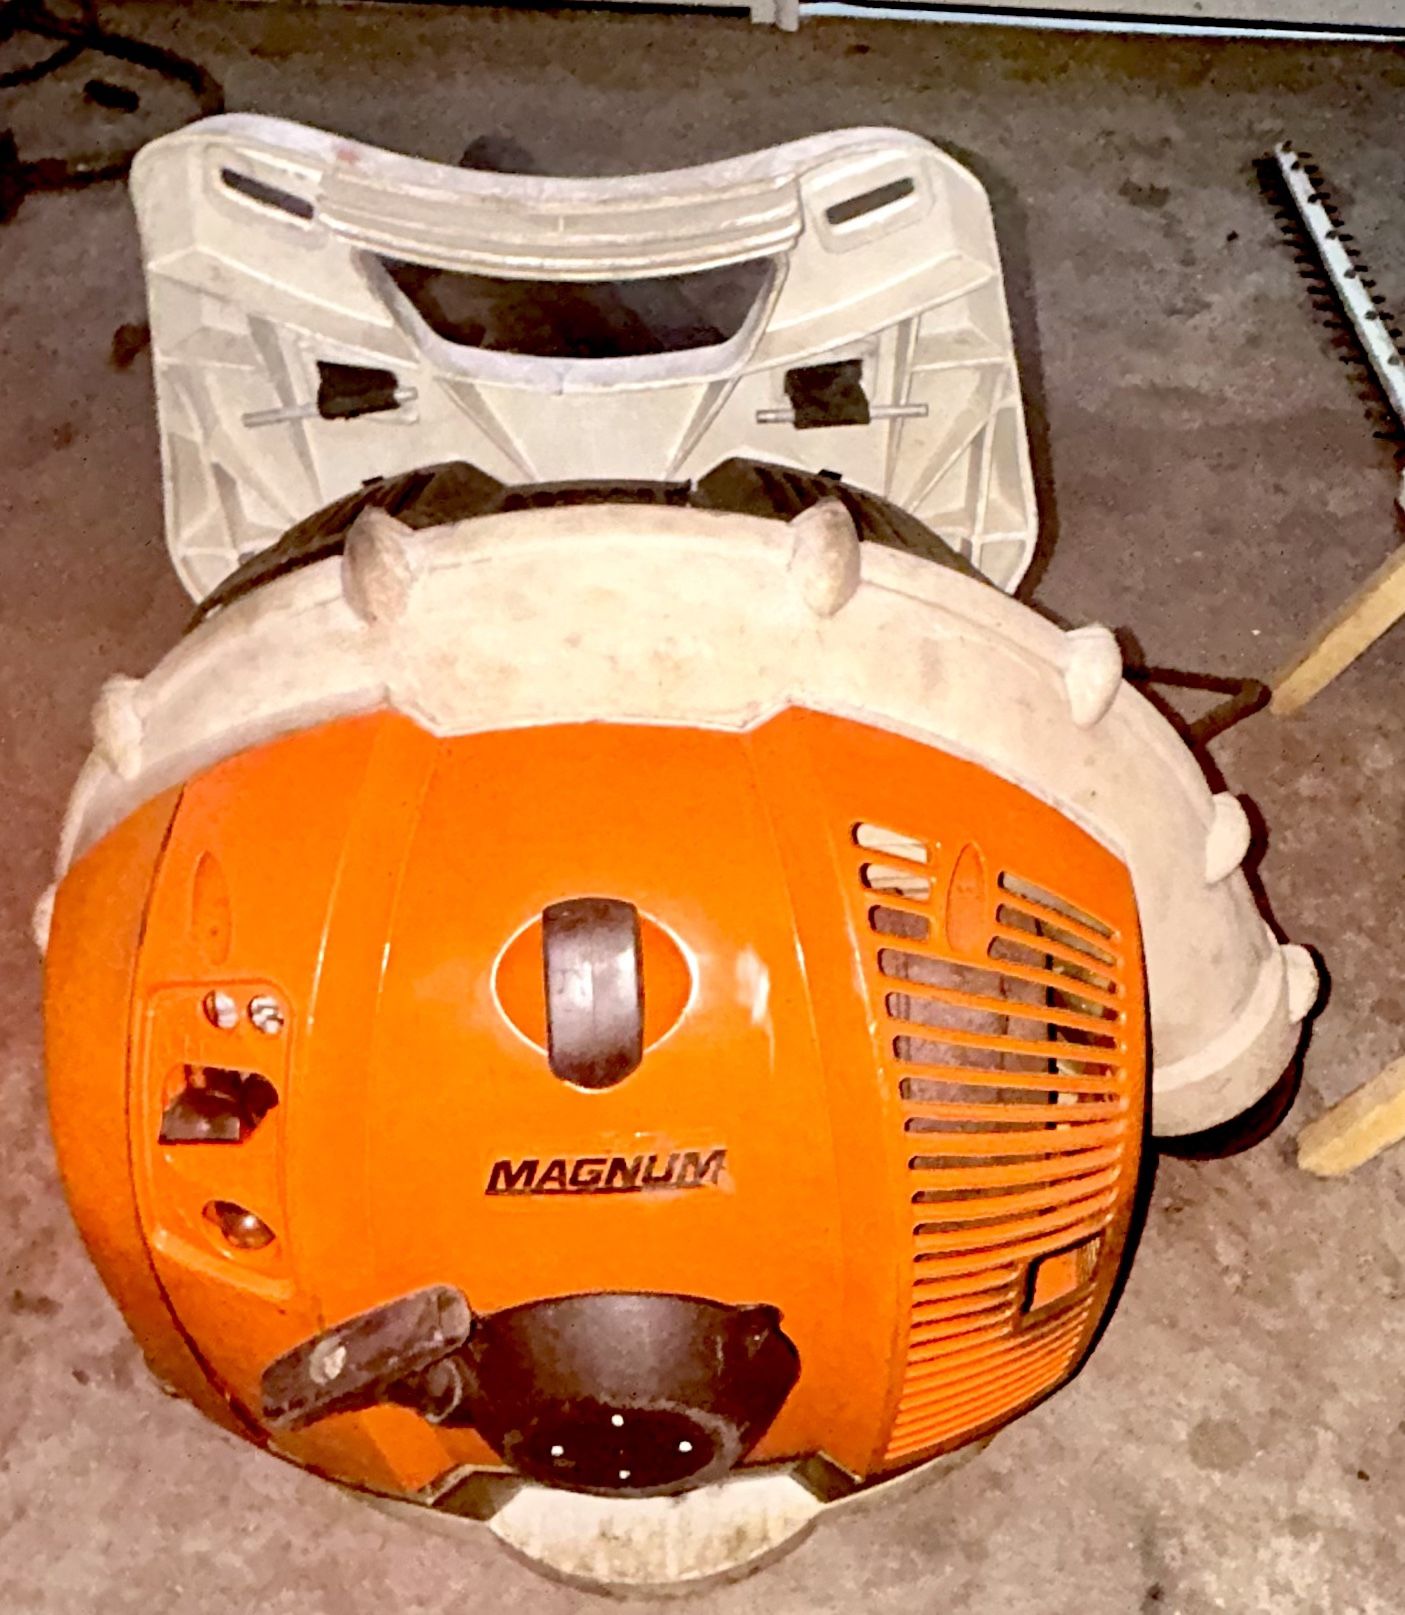 STIHL BR600z Backpack Blower  NEW CARBURETOR  STARTS 1 or 2 Pulls  RUNS GREAT  VERY POWERFUL